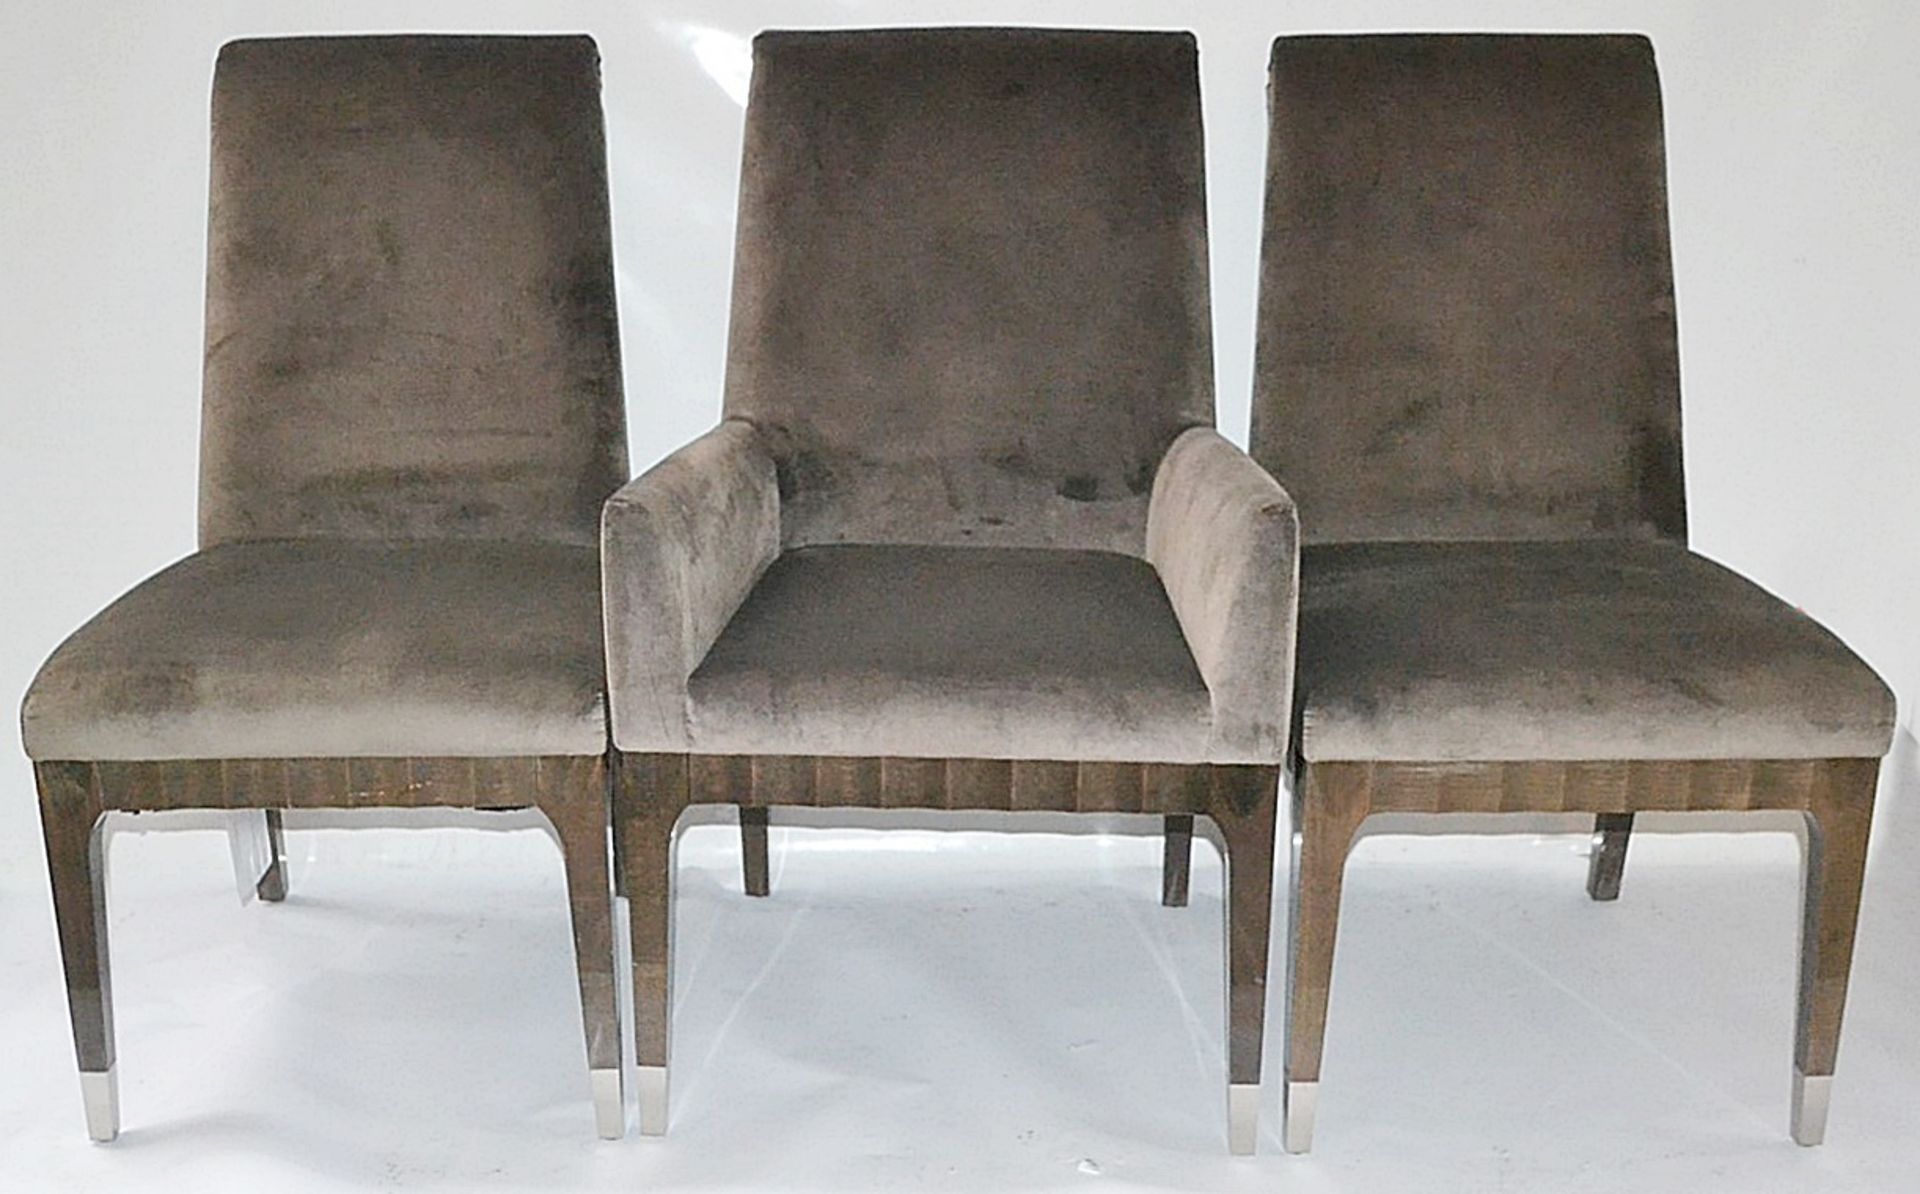 6 x GIORGIO COLLECTION 'Absolute' Italian Designer Dining Chairs - Pre-owned In Good Overall - Image 2 of 16